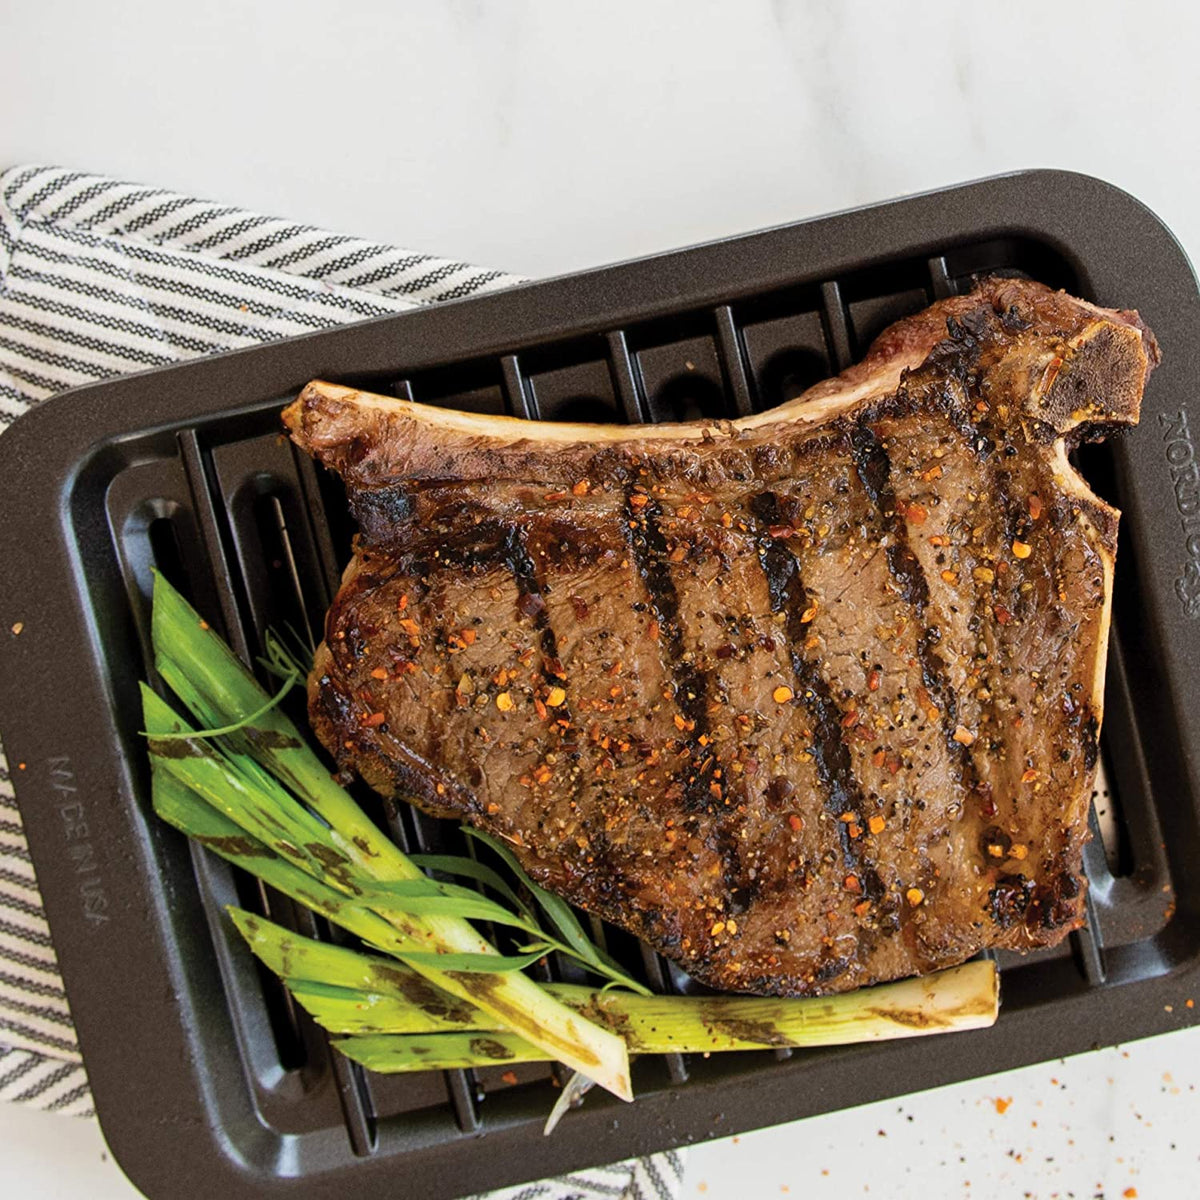 Compact Grill & Sear Pan 8x6 inches